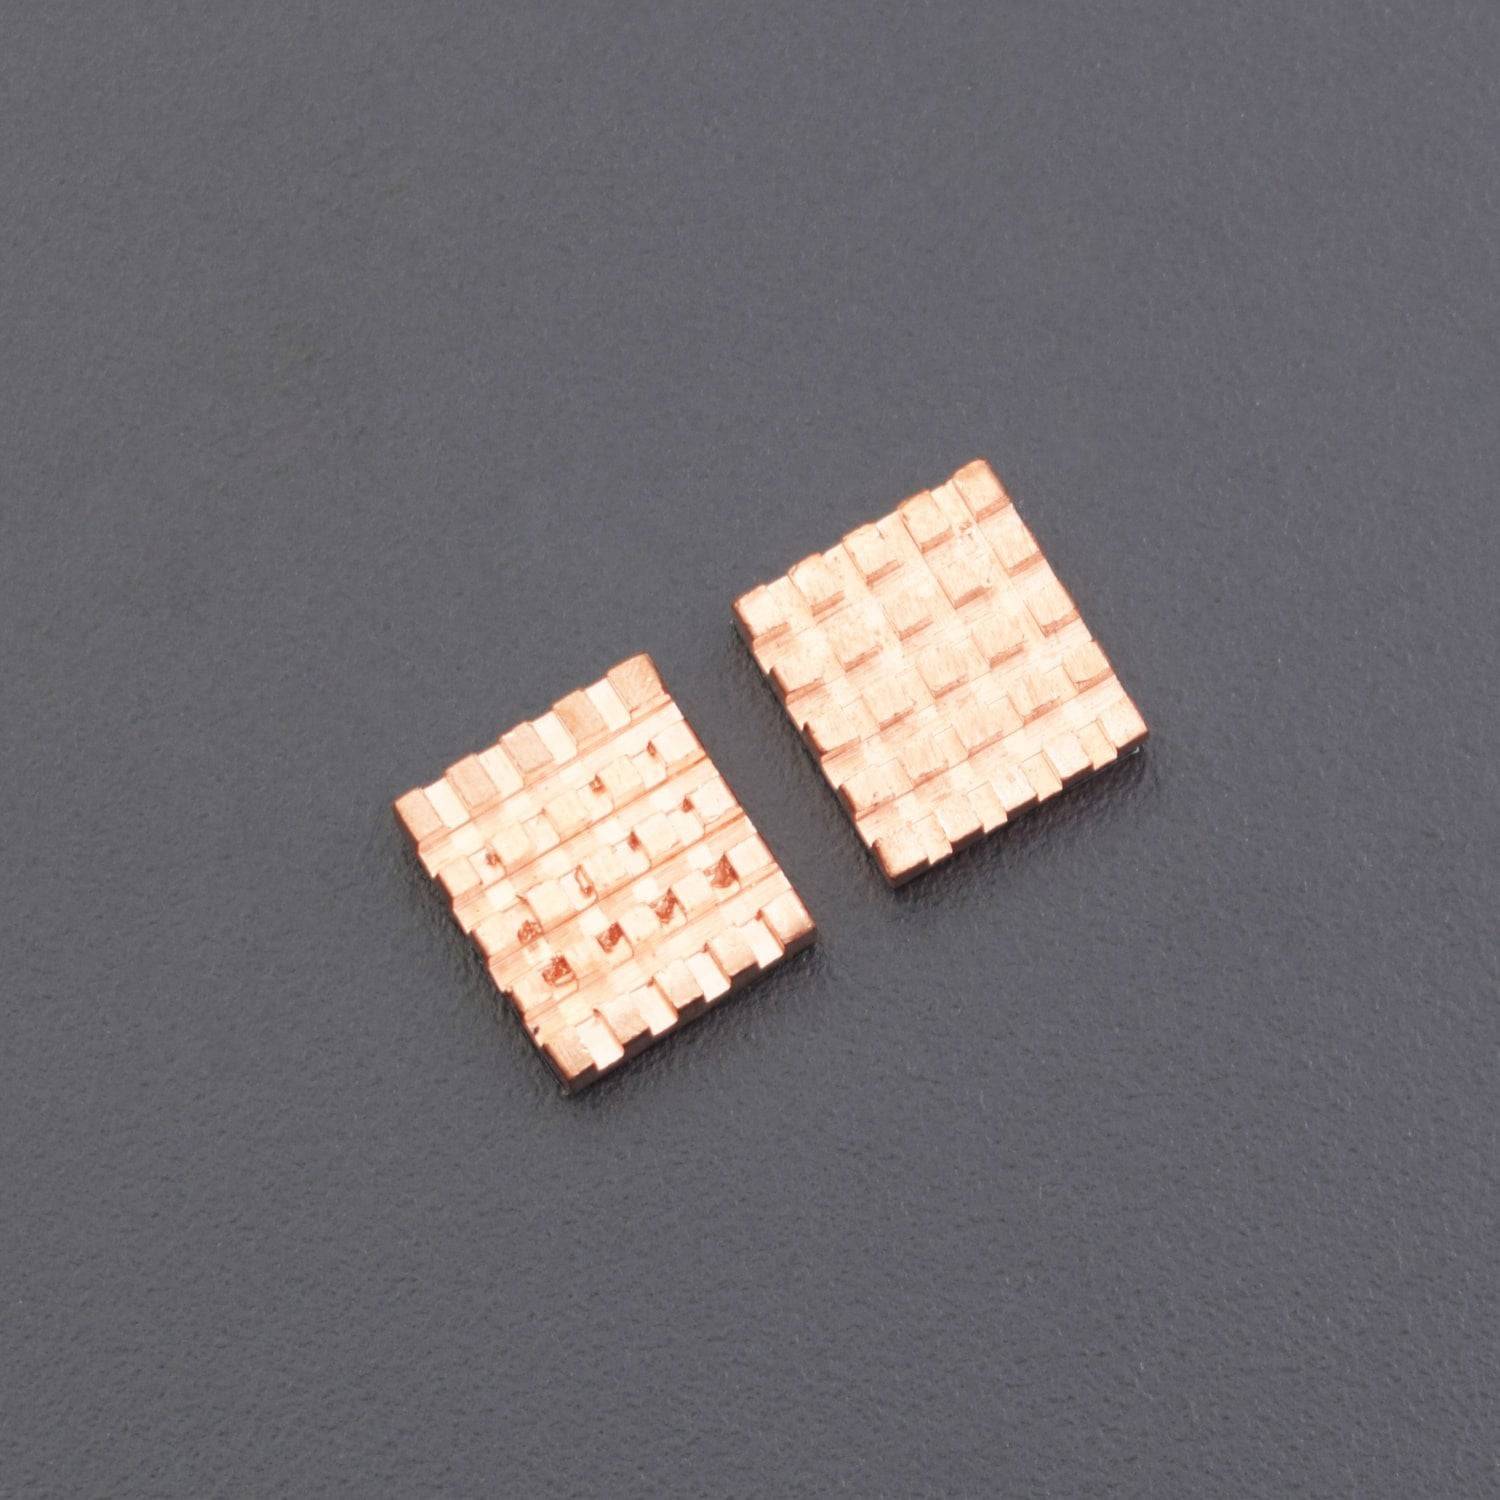 Solid Copper Heat Sink Cooling Heat sink Set With Adhesive for Raspberry Pi 2/3 Model - RS179 - REES52